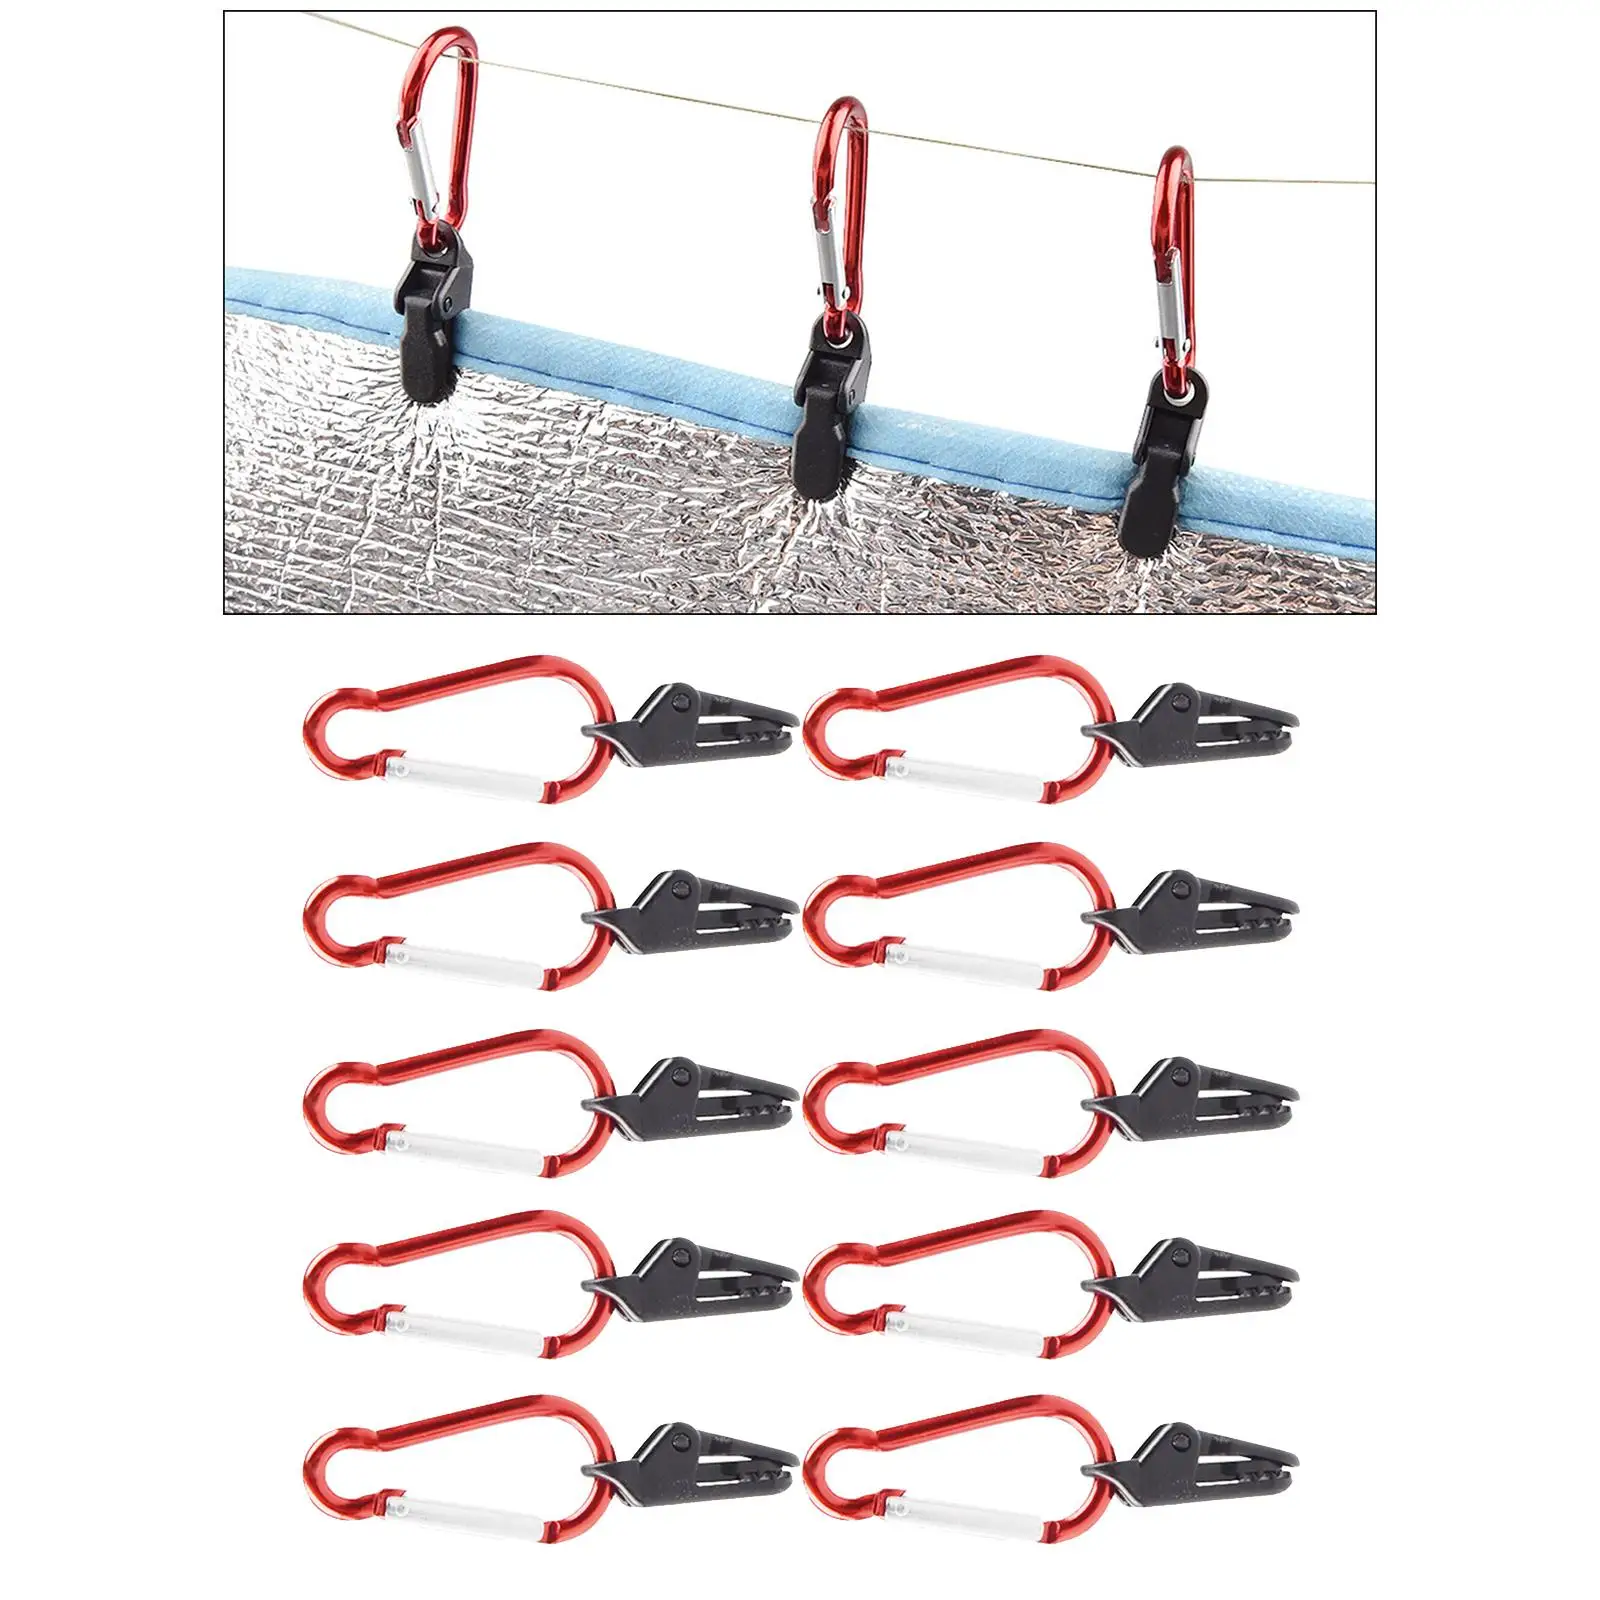 10pcs Tarp Clips Buckle,Heavy Duty   Grip Tent Clamps Tightening Lock Grip Clamps for Outdoor Camping Hiking Traveling